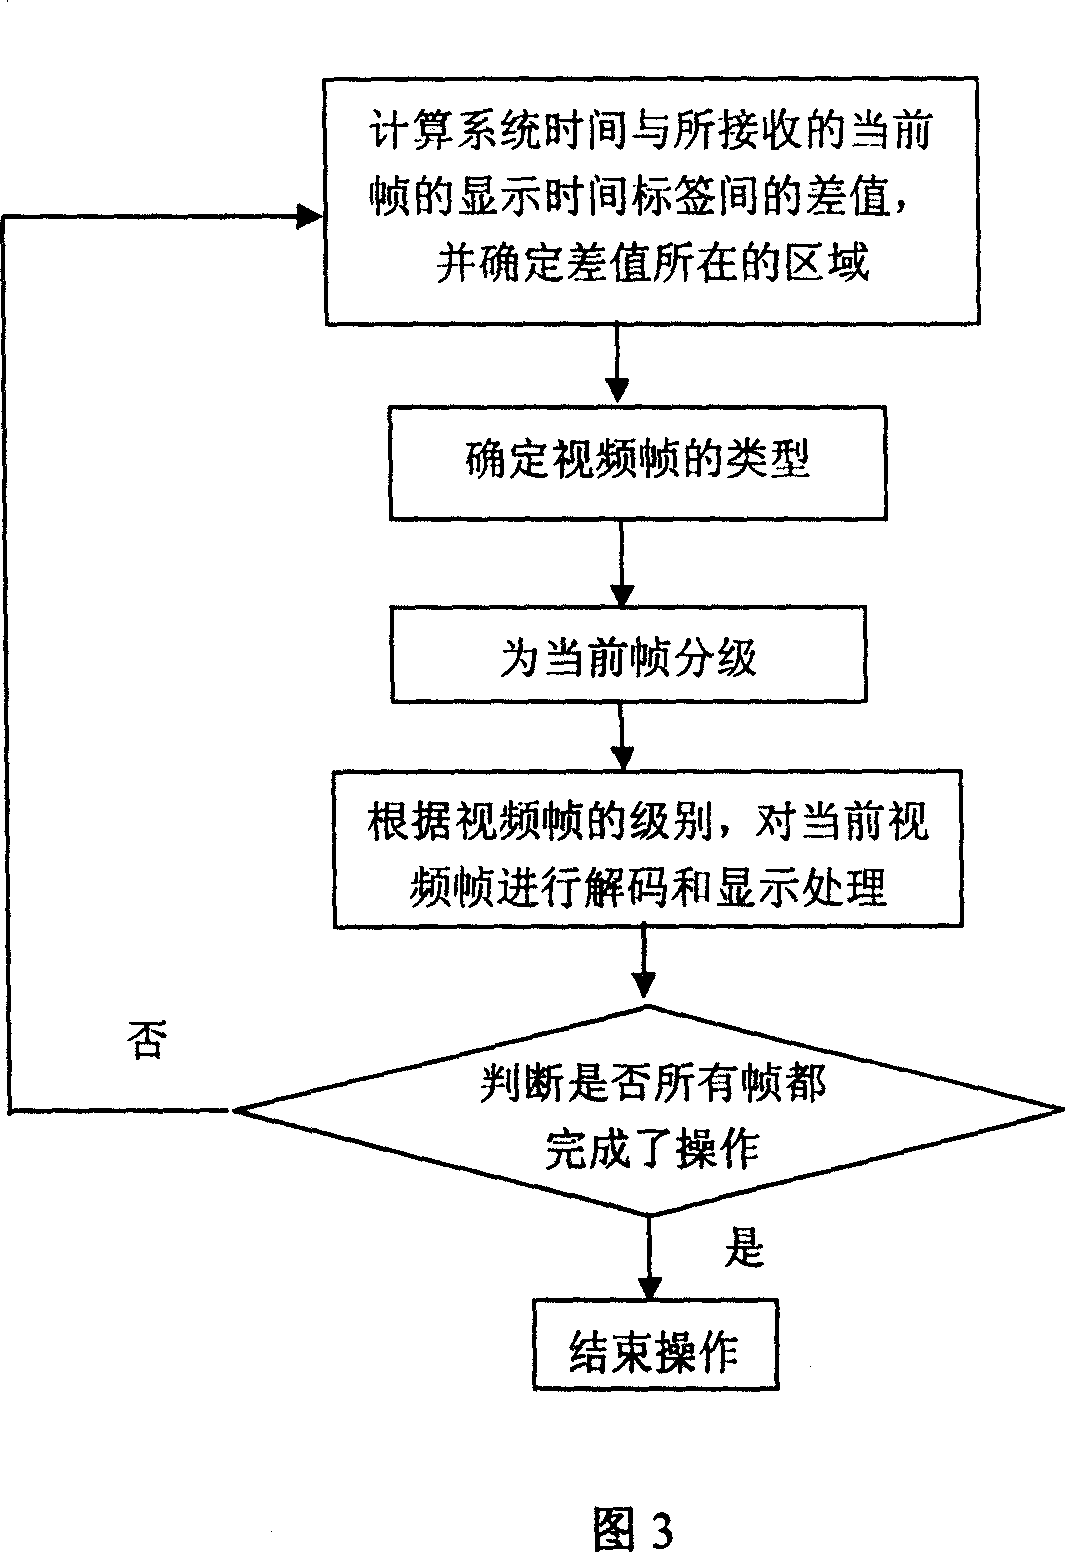 Hierarchical processing method of video frames in video playing